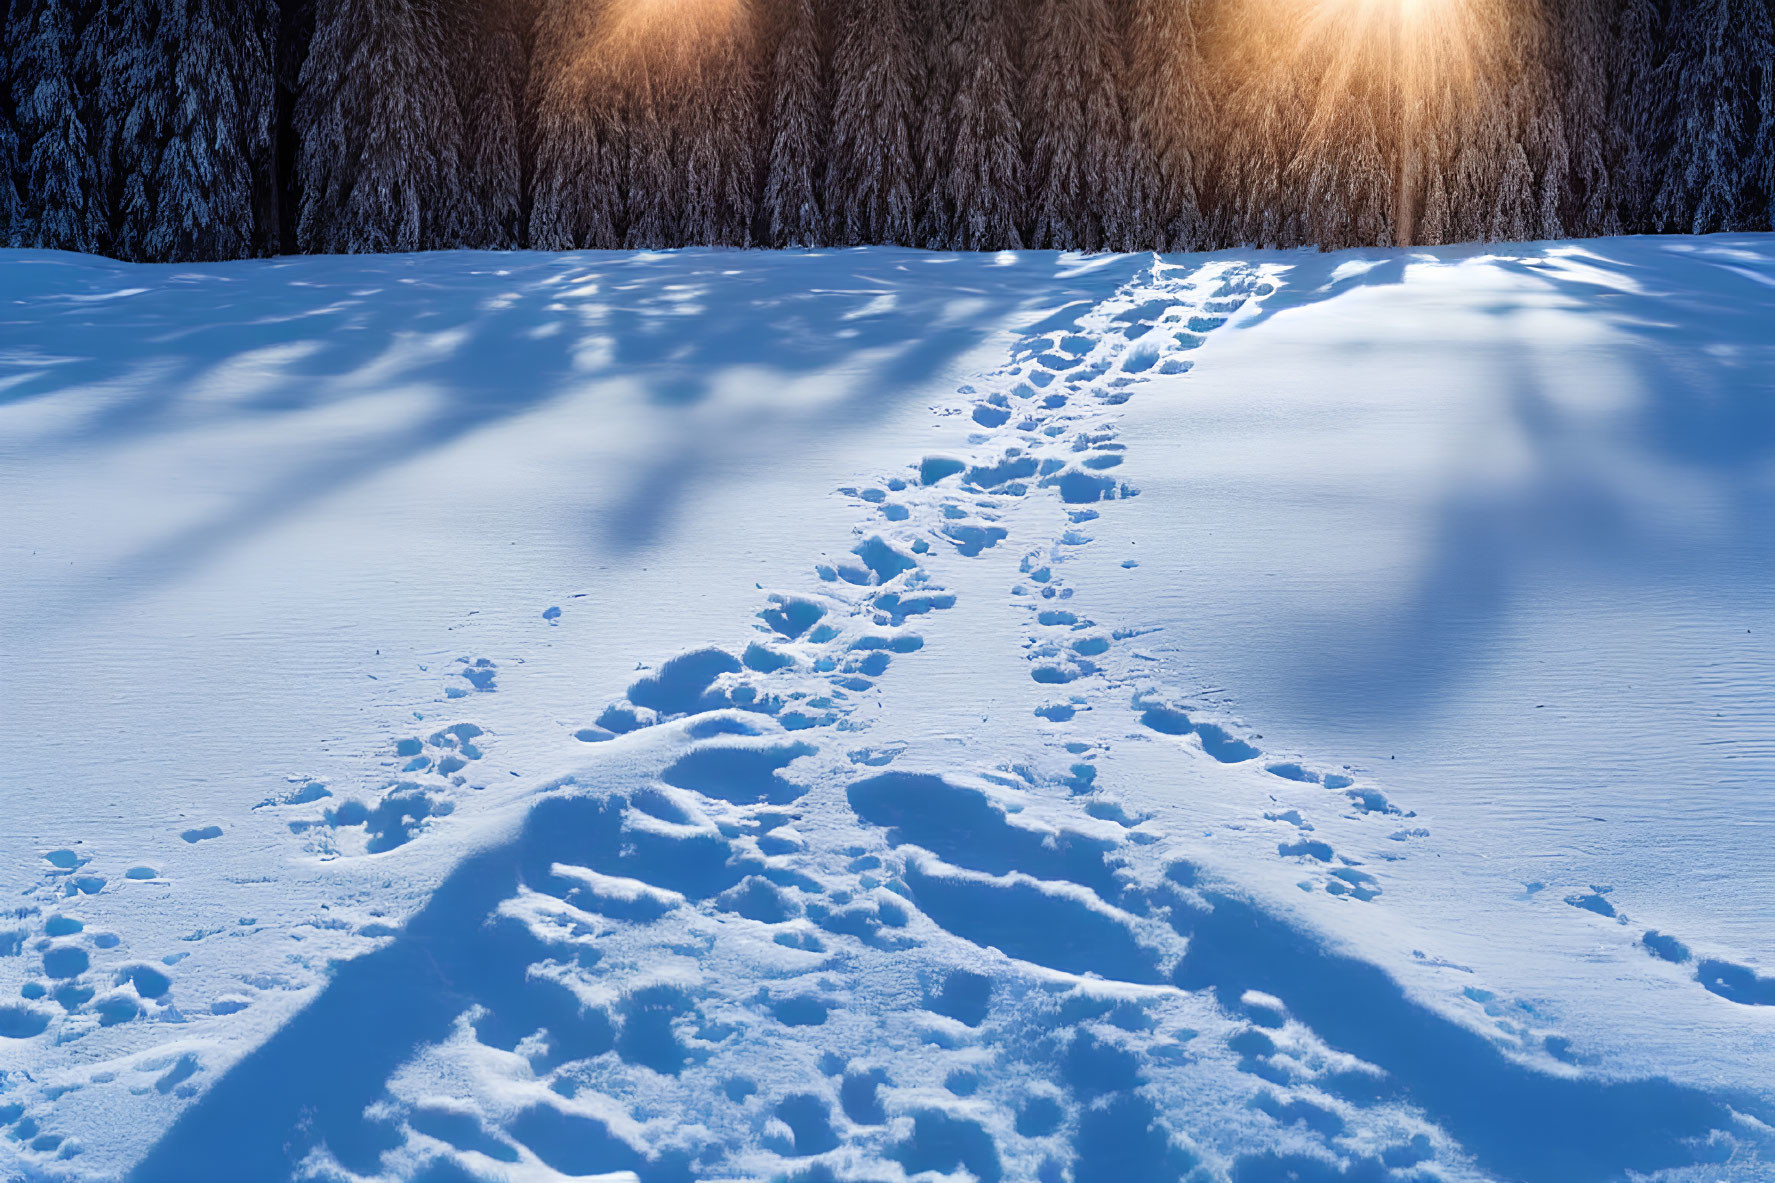 Snowy landscape with footprints, elongated tree shadows, and warm sunlight glow